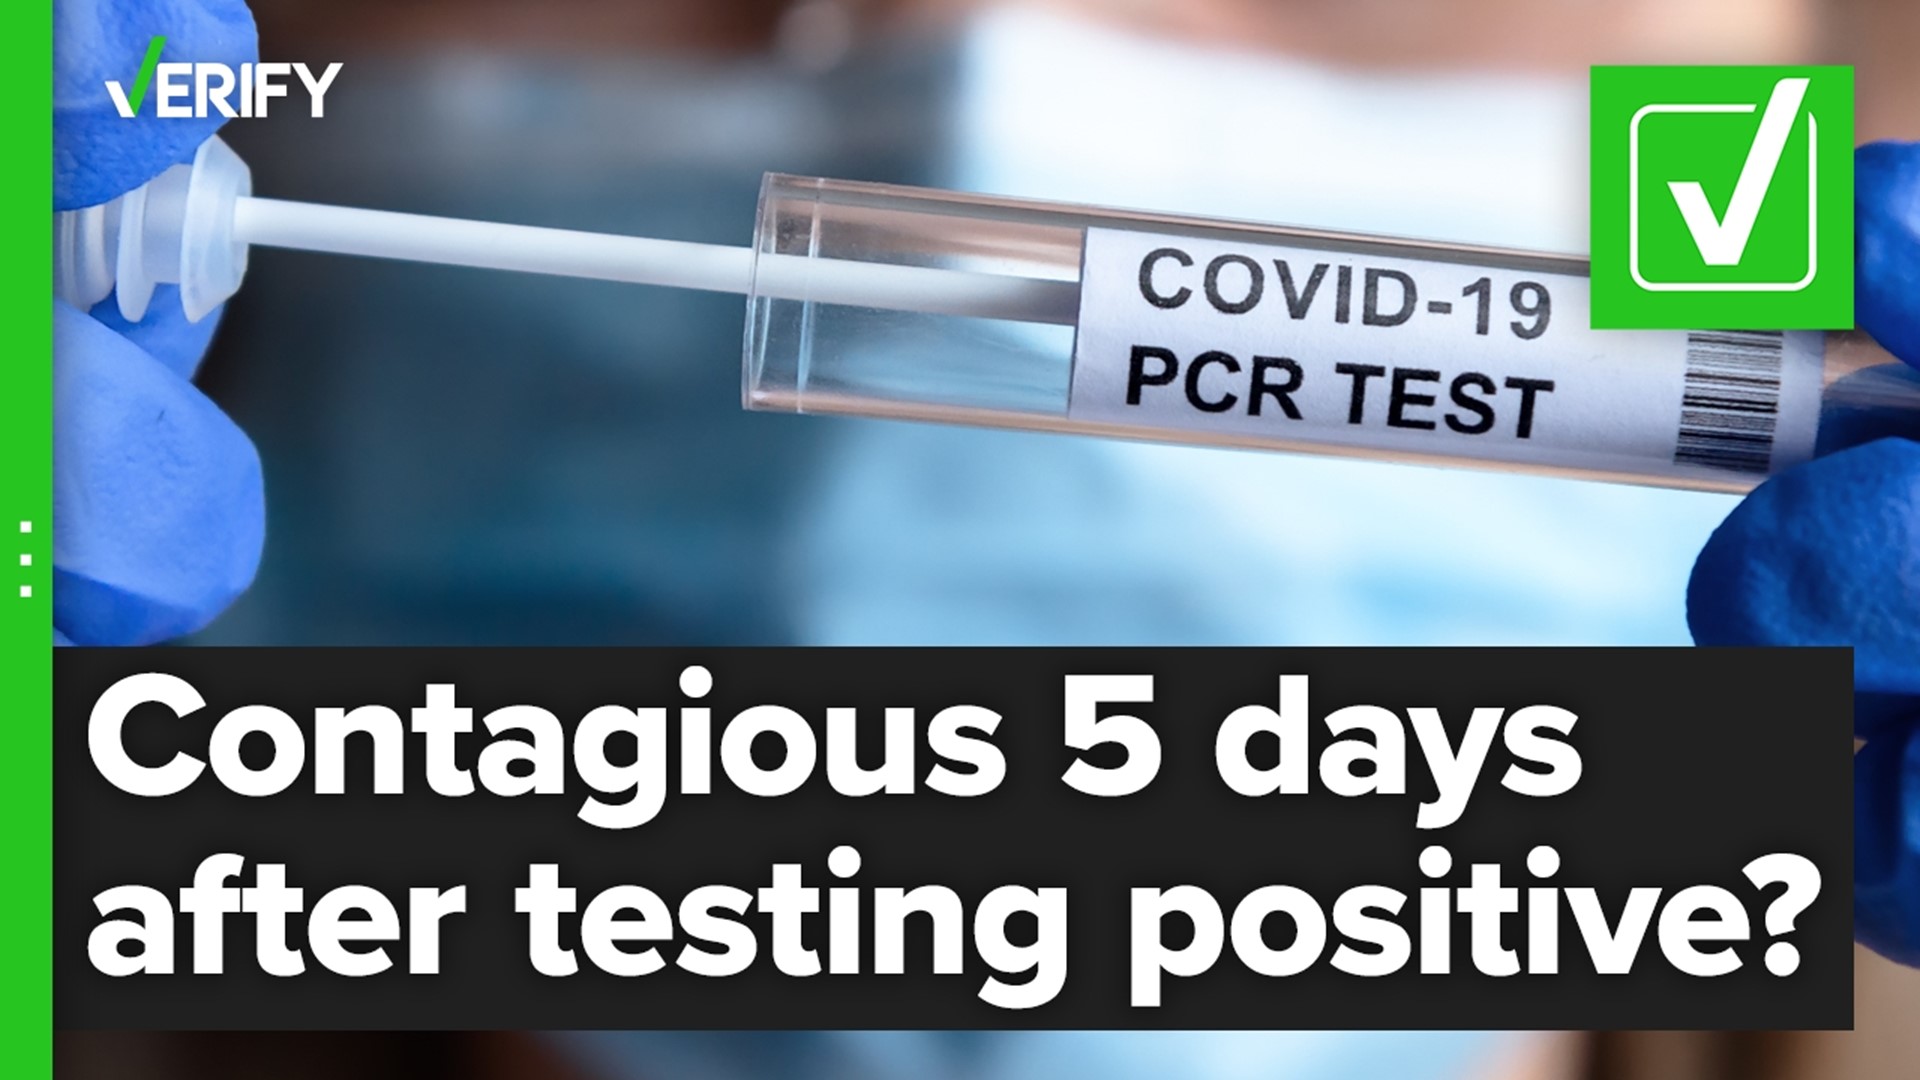 Can a person still be contagious more than five days after their first positive COVID-19 test? The VERIFY team confirms this is true.